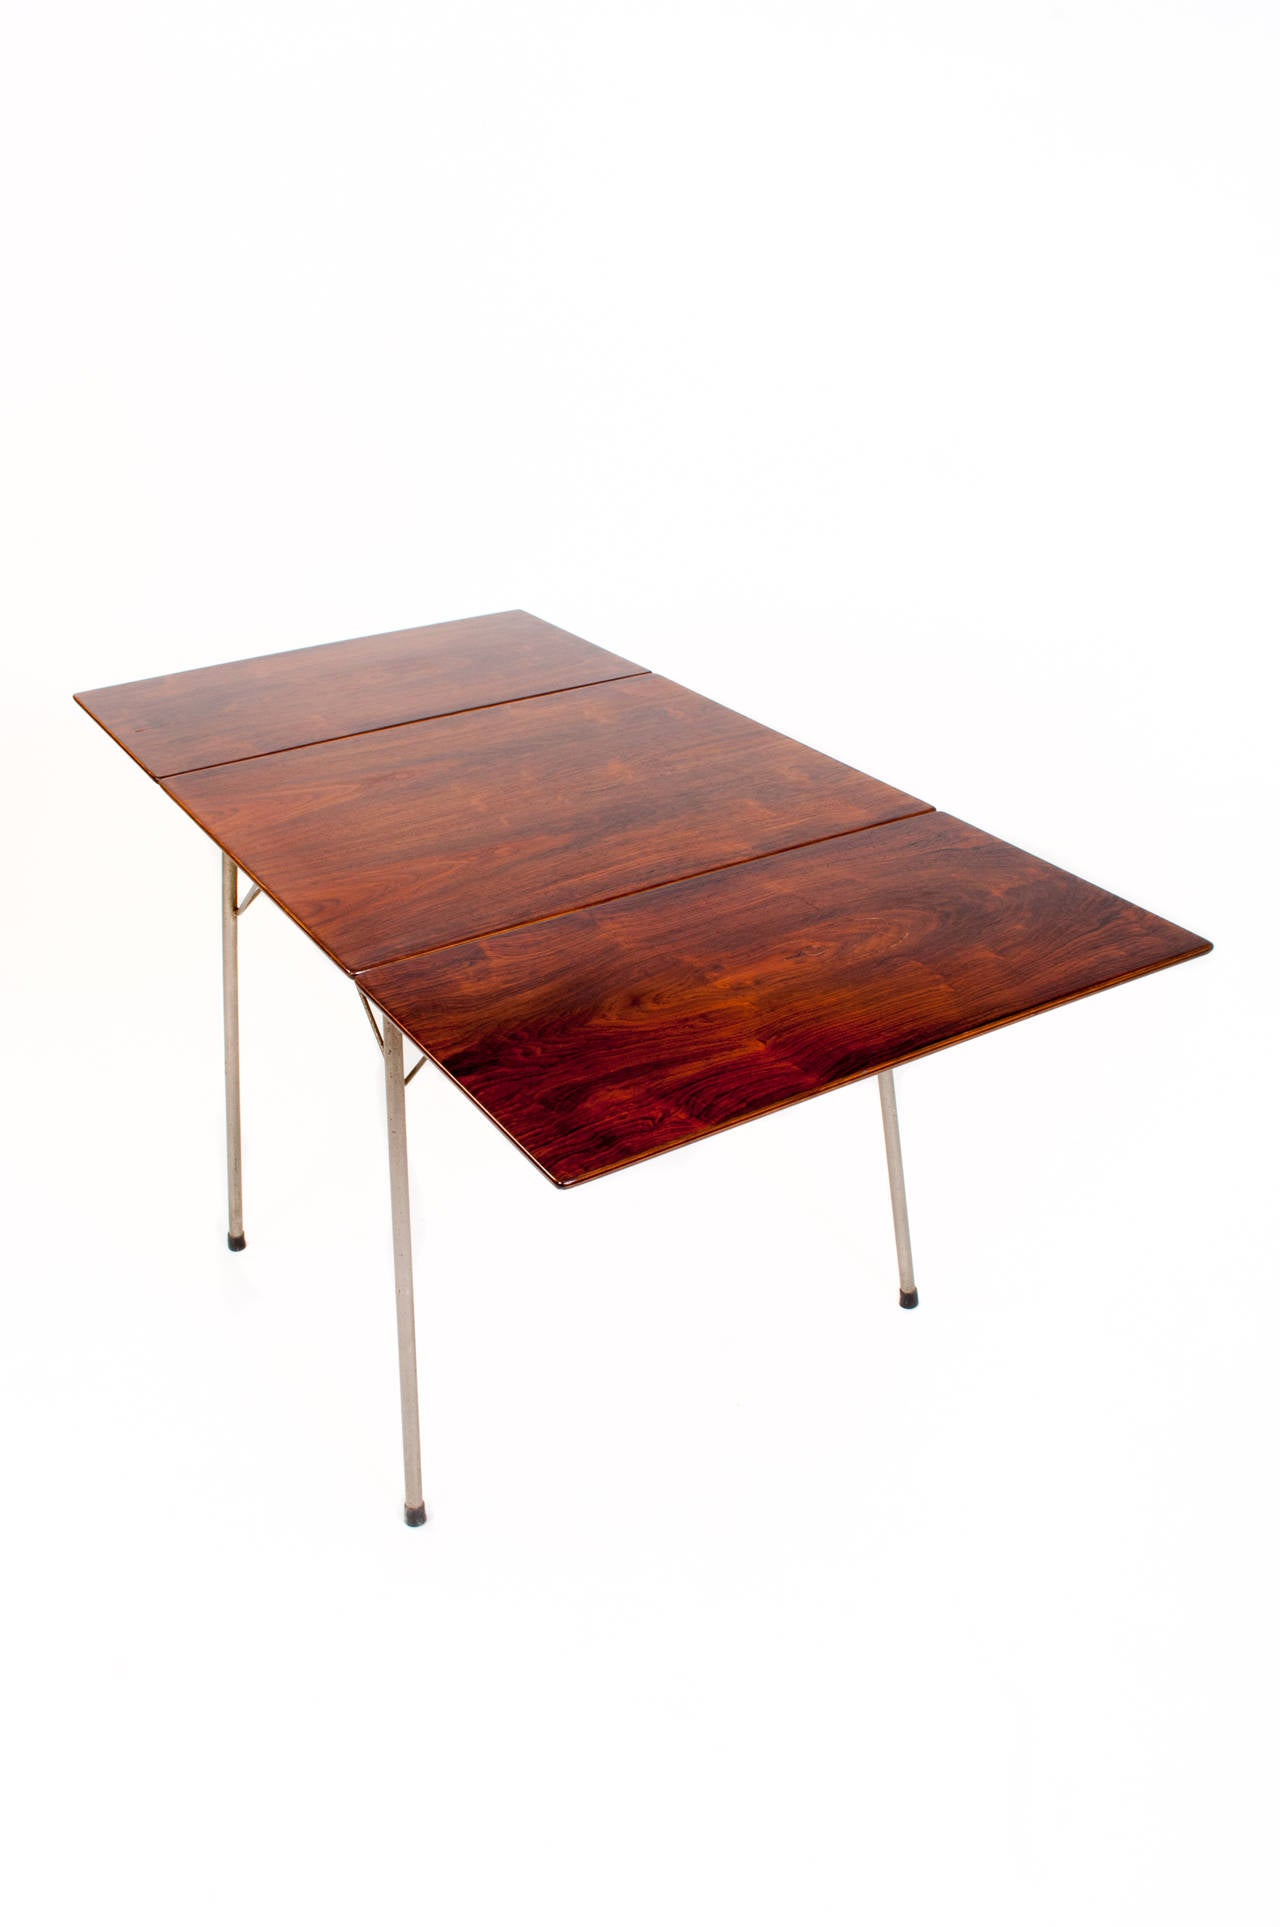 Arne Jacobsen. Drop-leaf table. Model 3601 rosewood top, chrome-plated steel.

Produced in 1953 by Fritz Hansen.

Folded out 140 cm.

Beautiful refinished condition.